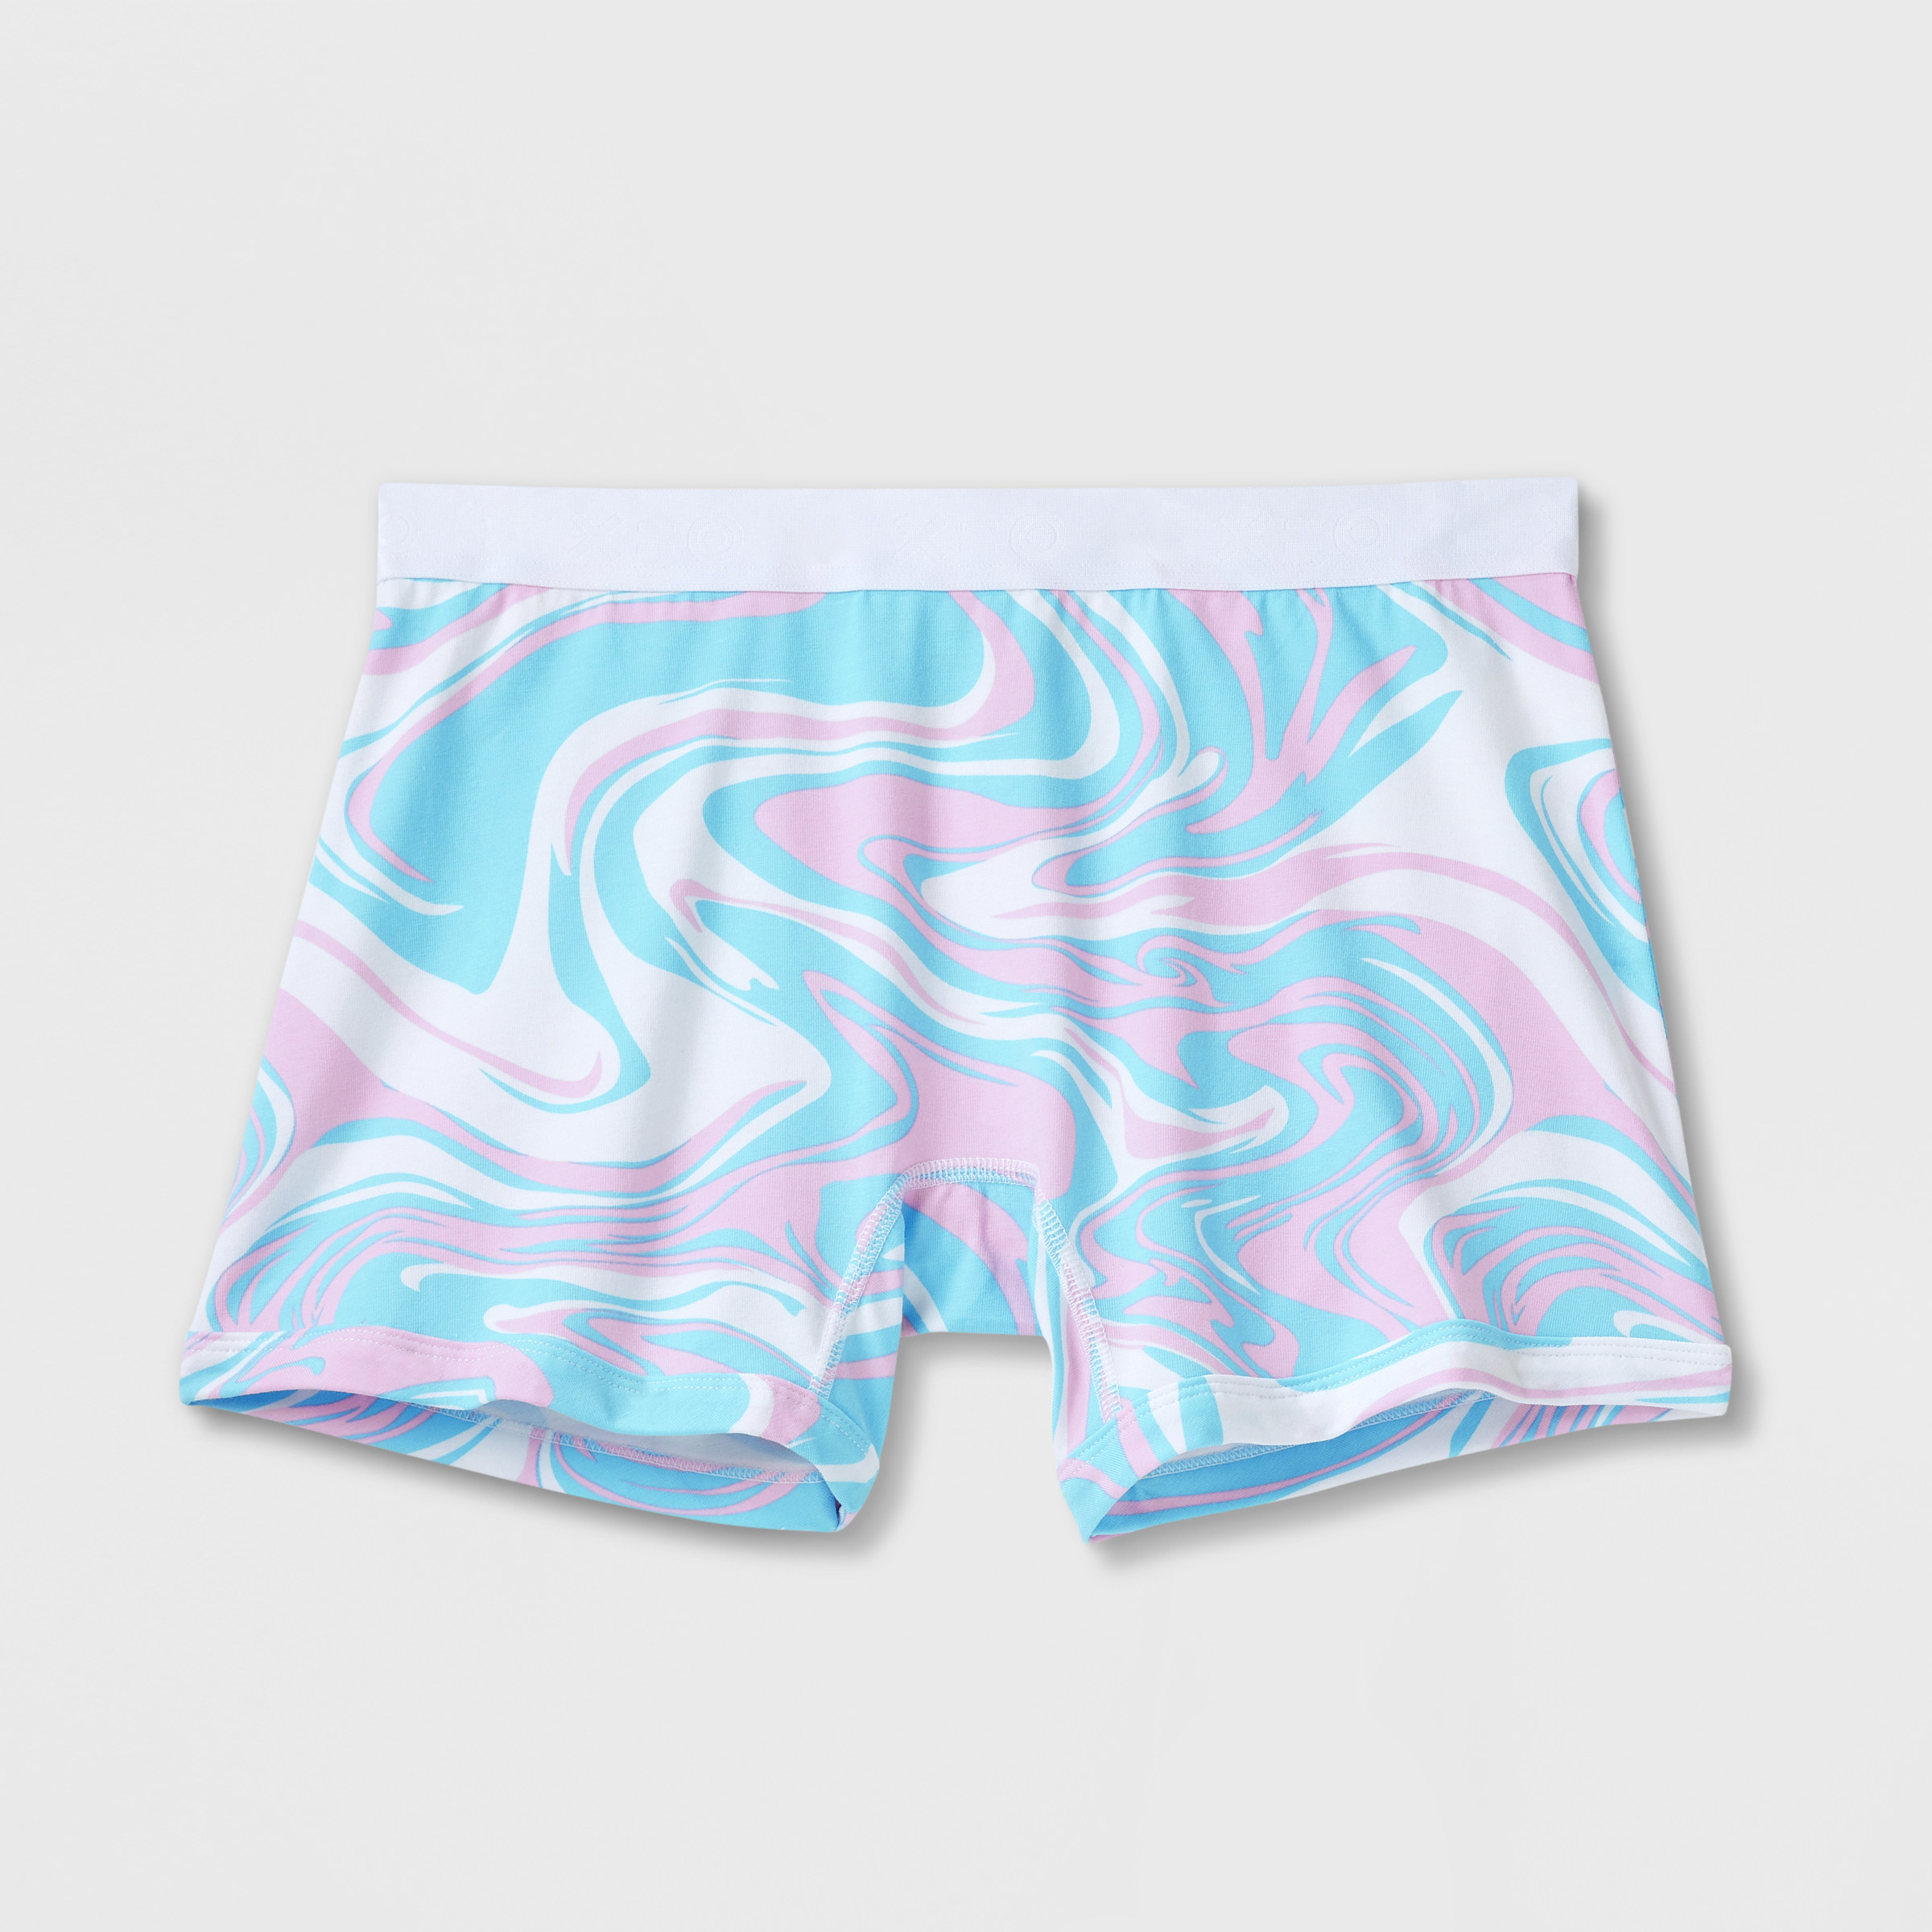 TomboyX Boy Shorts featuring an all-over transgender flag colors swirl design